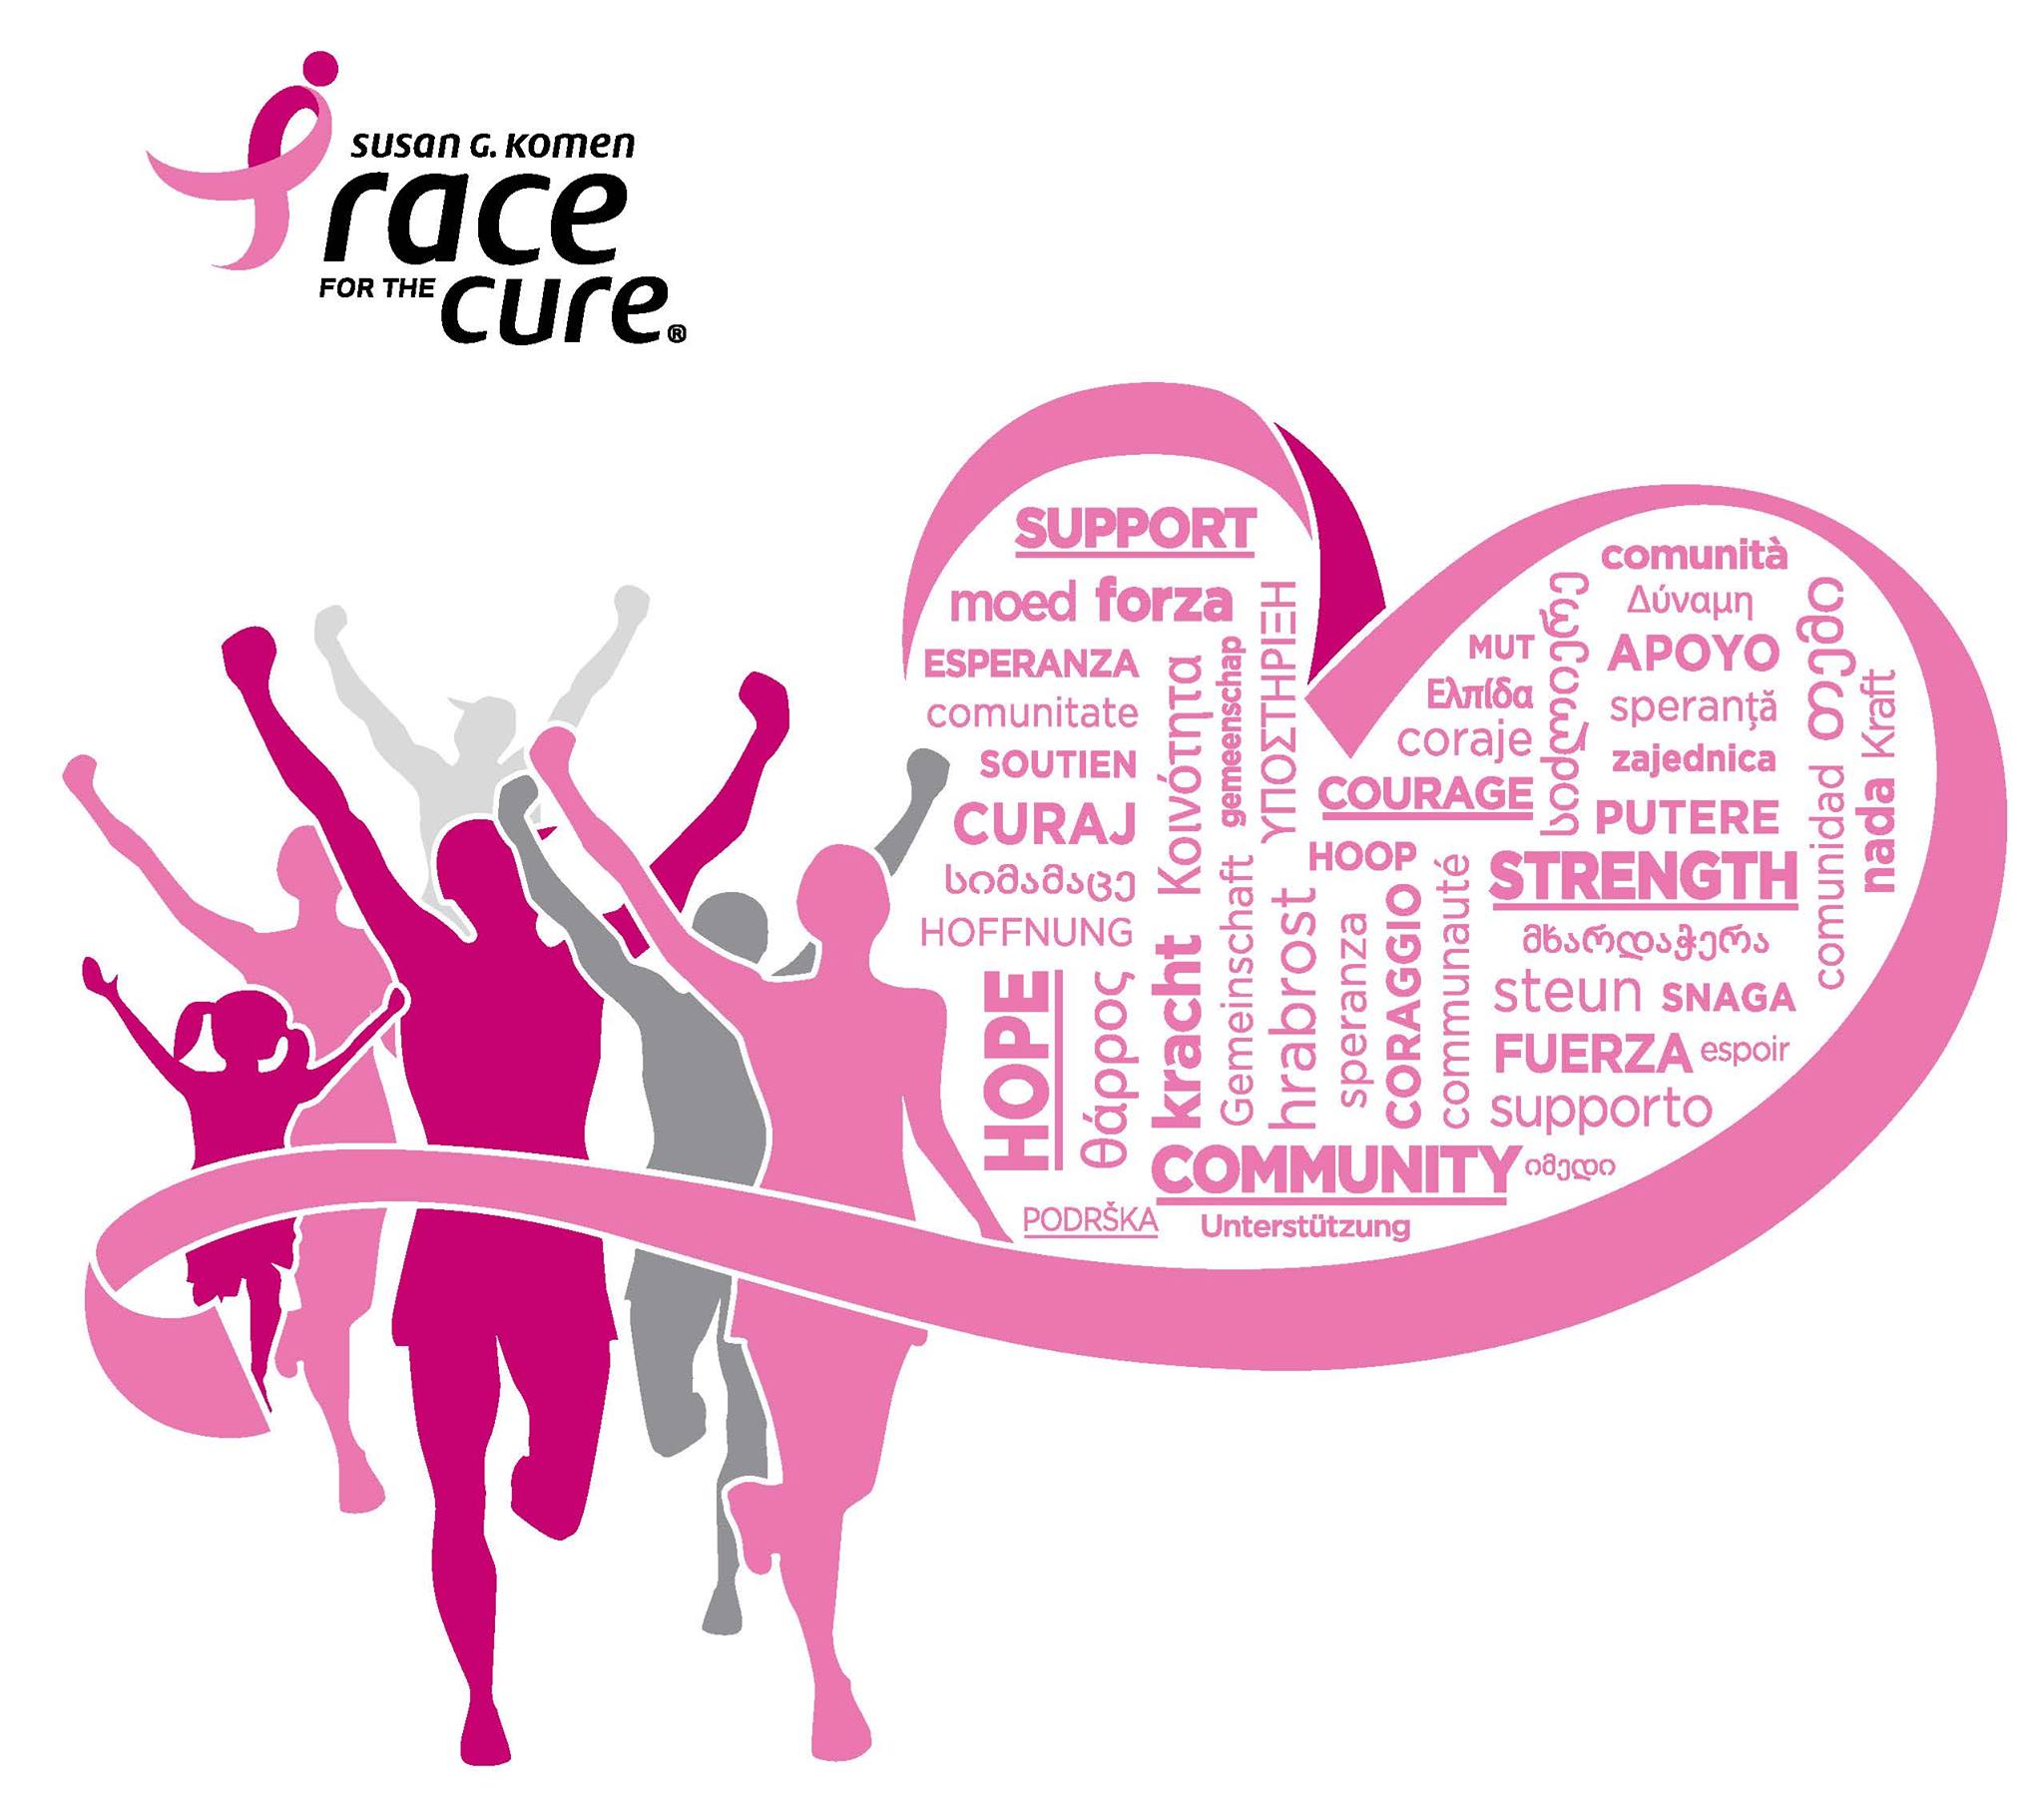 Image 2016 Komen Race for the Cure®